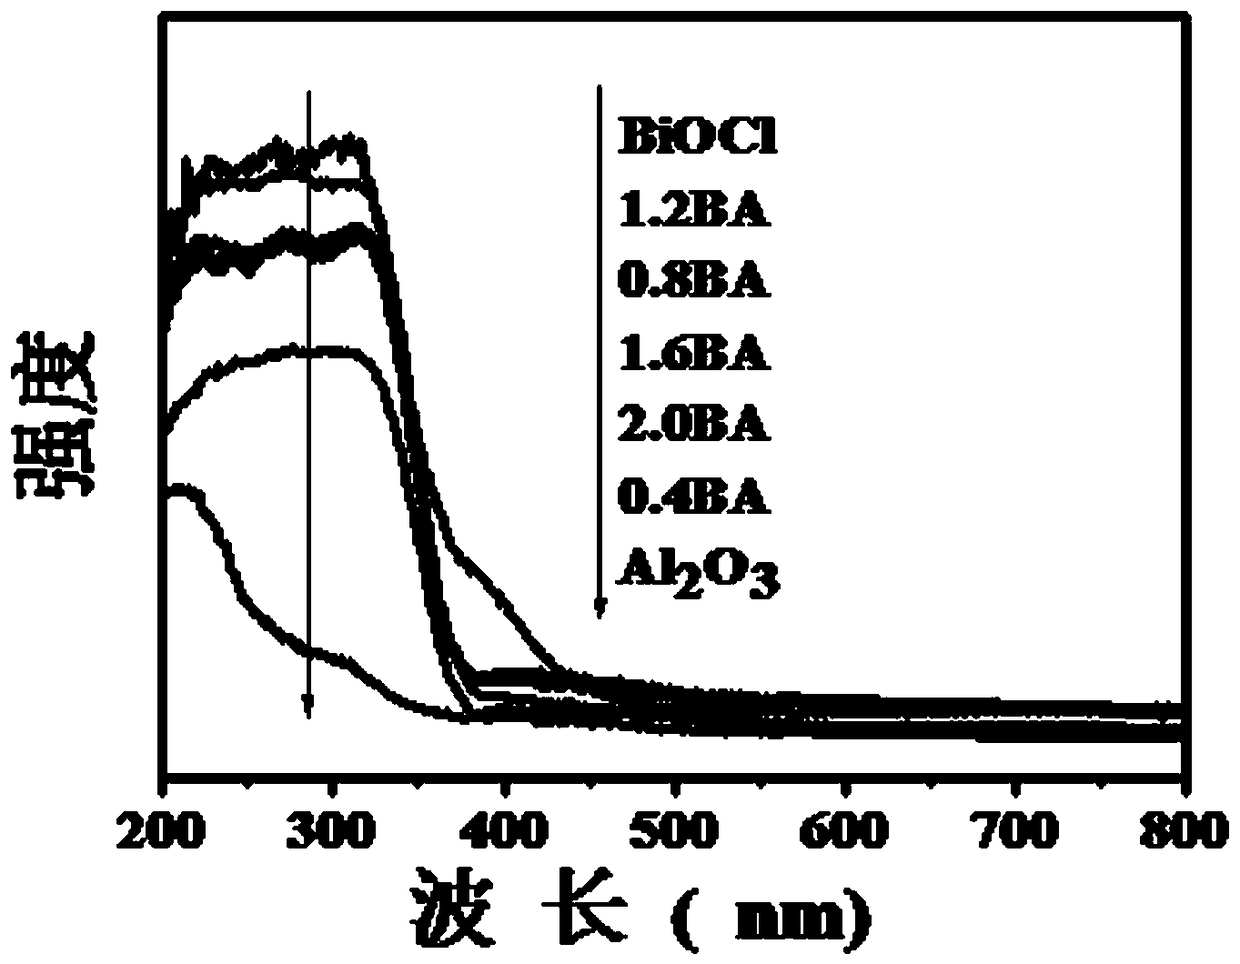 A biocl/al2o3 heterojunction material with photocatalytic activity and its preparation method